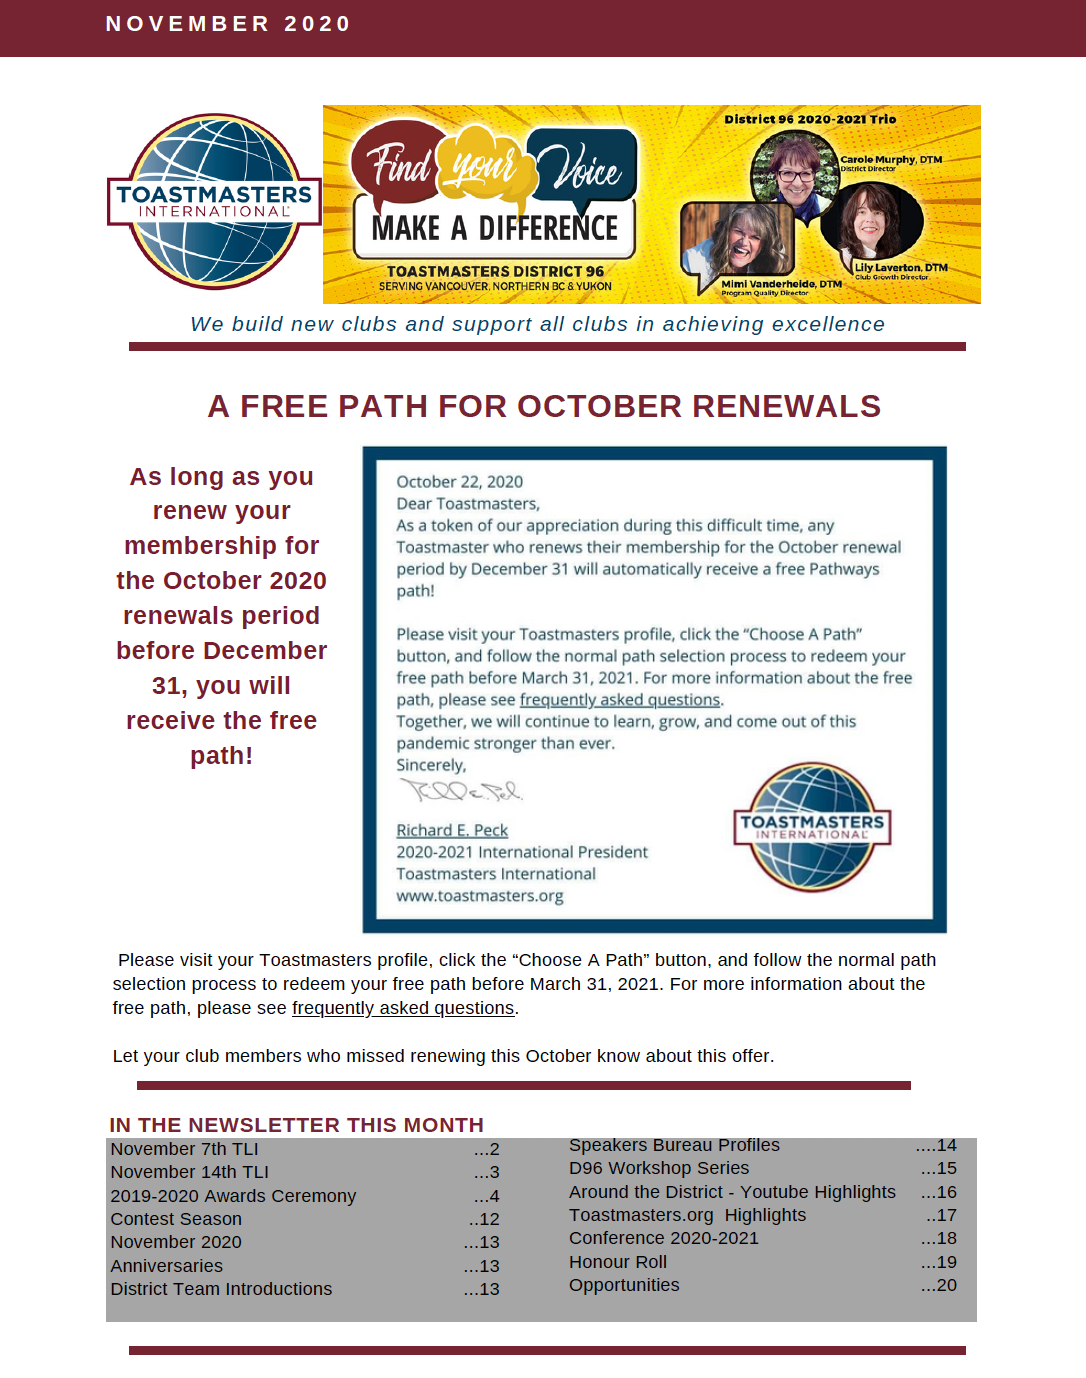 A Free Path for October Renewals